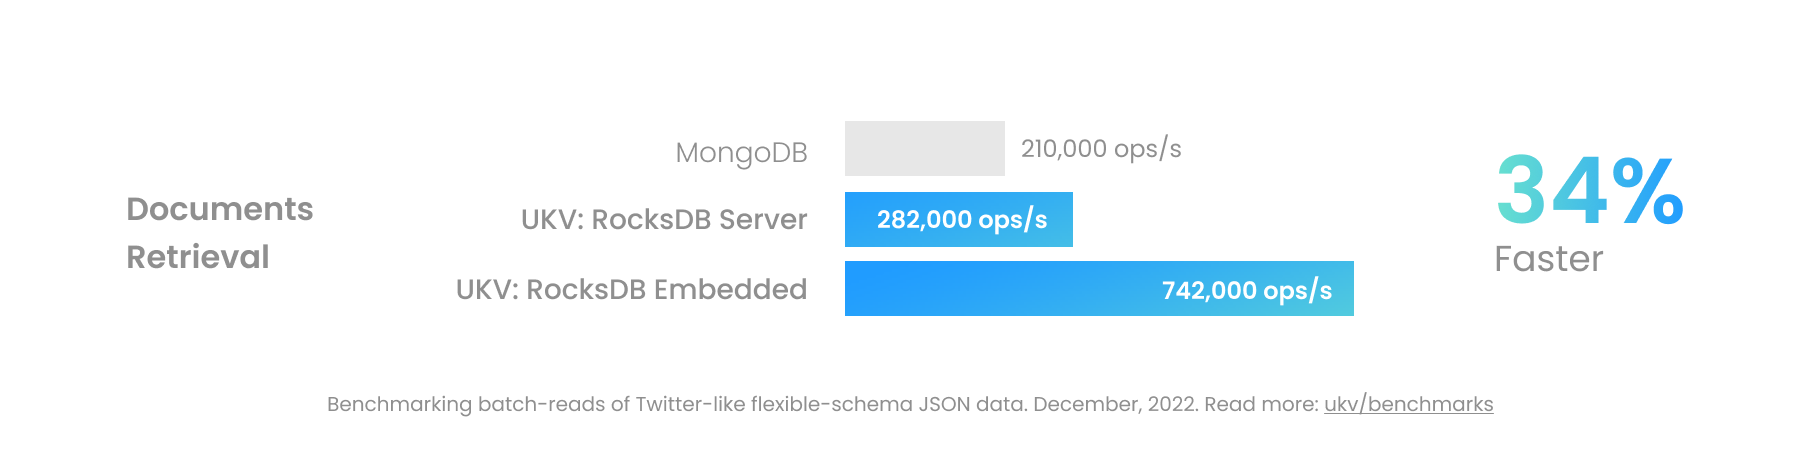 Documents Processing Performance Chart for UKV and MongoDB